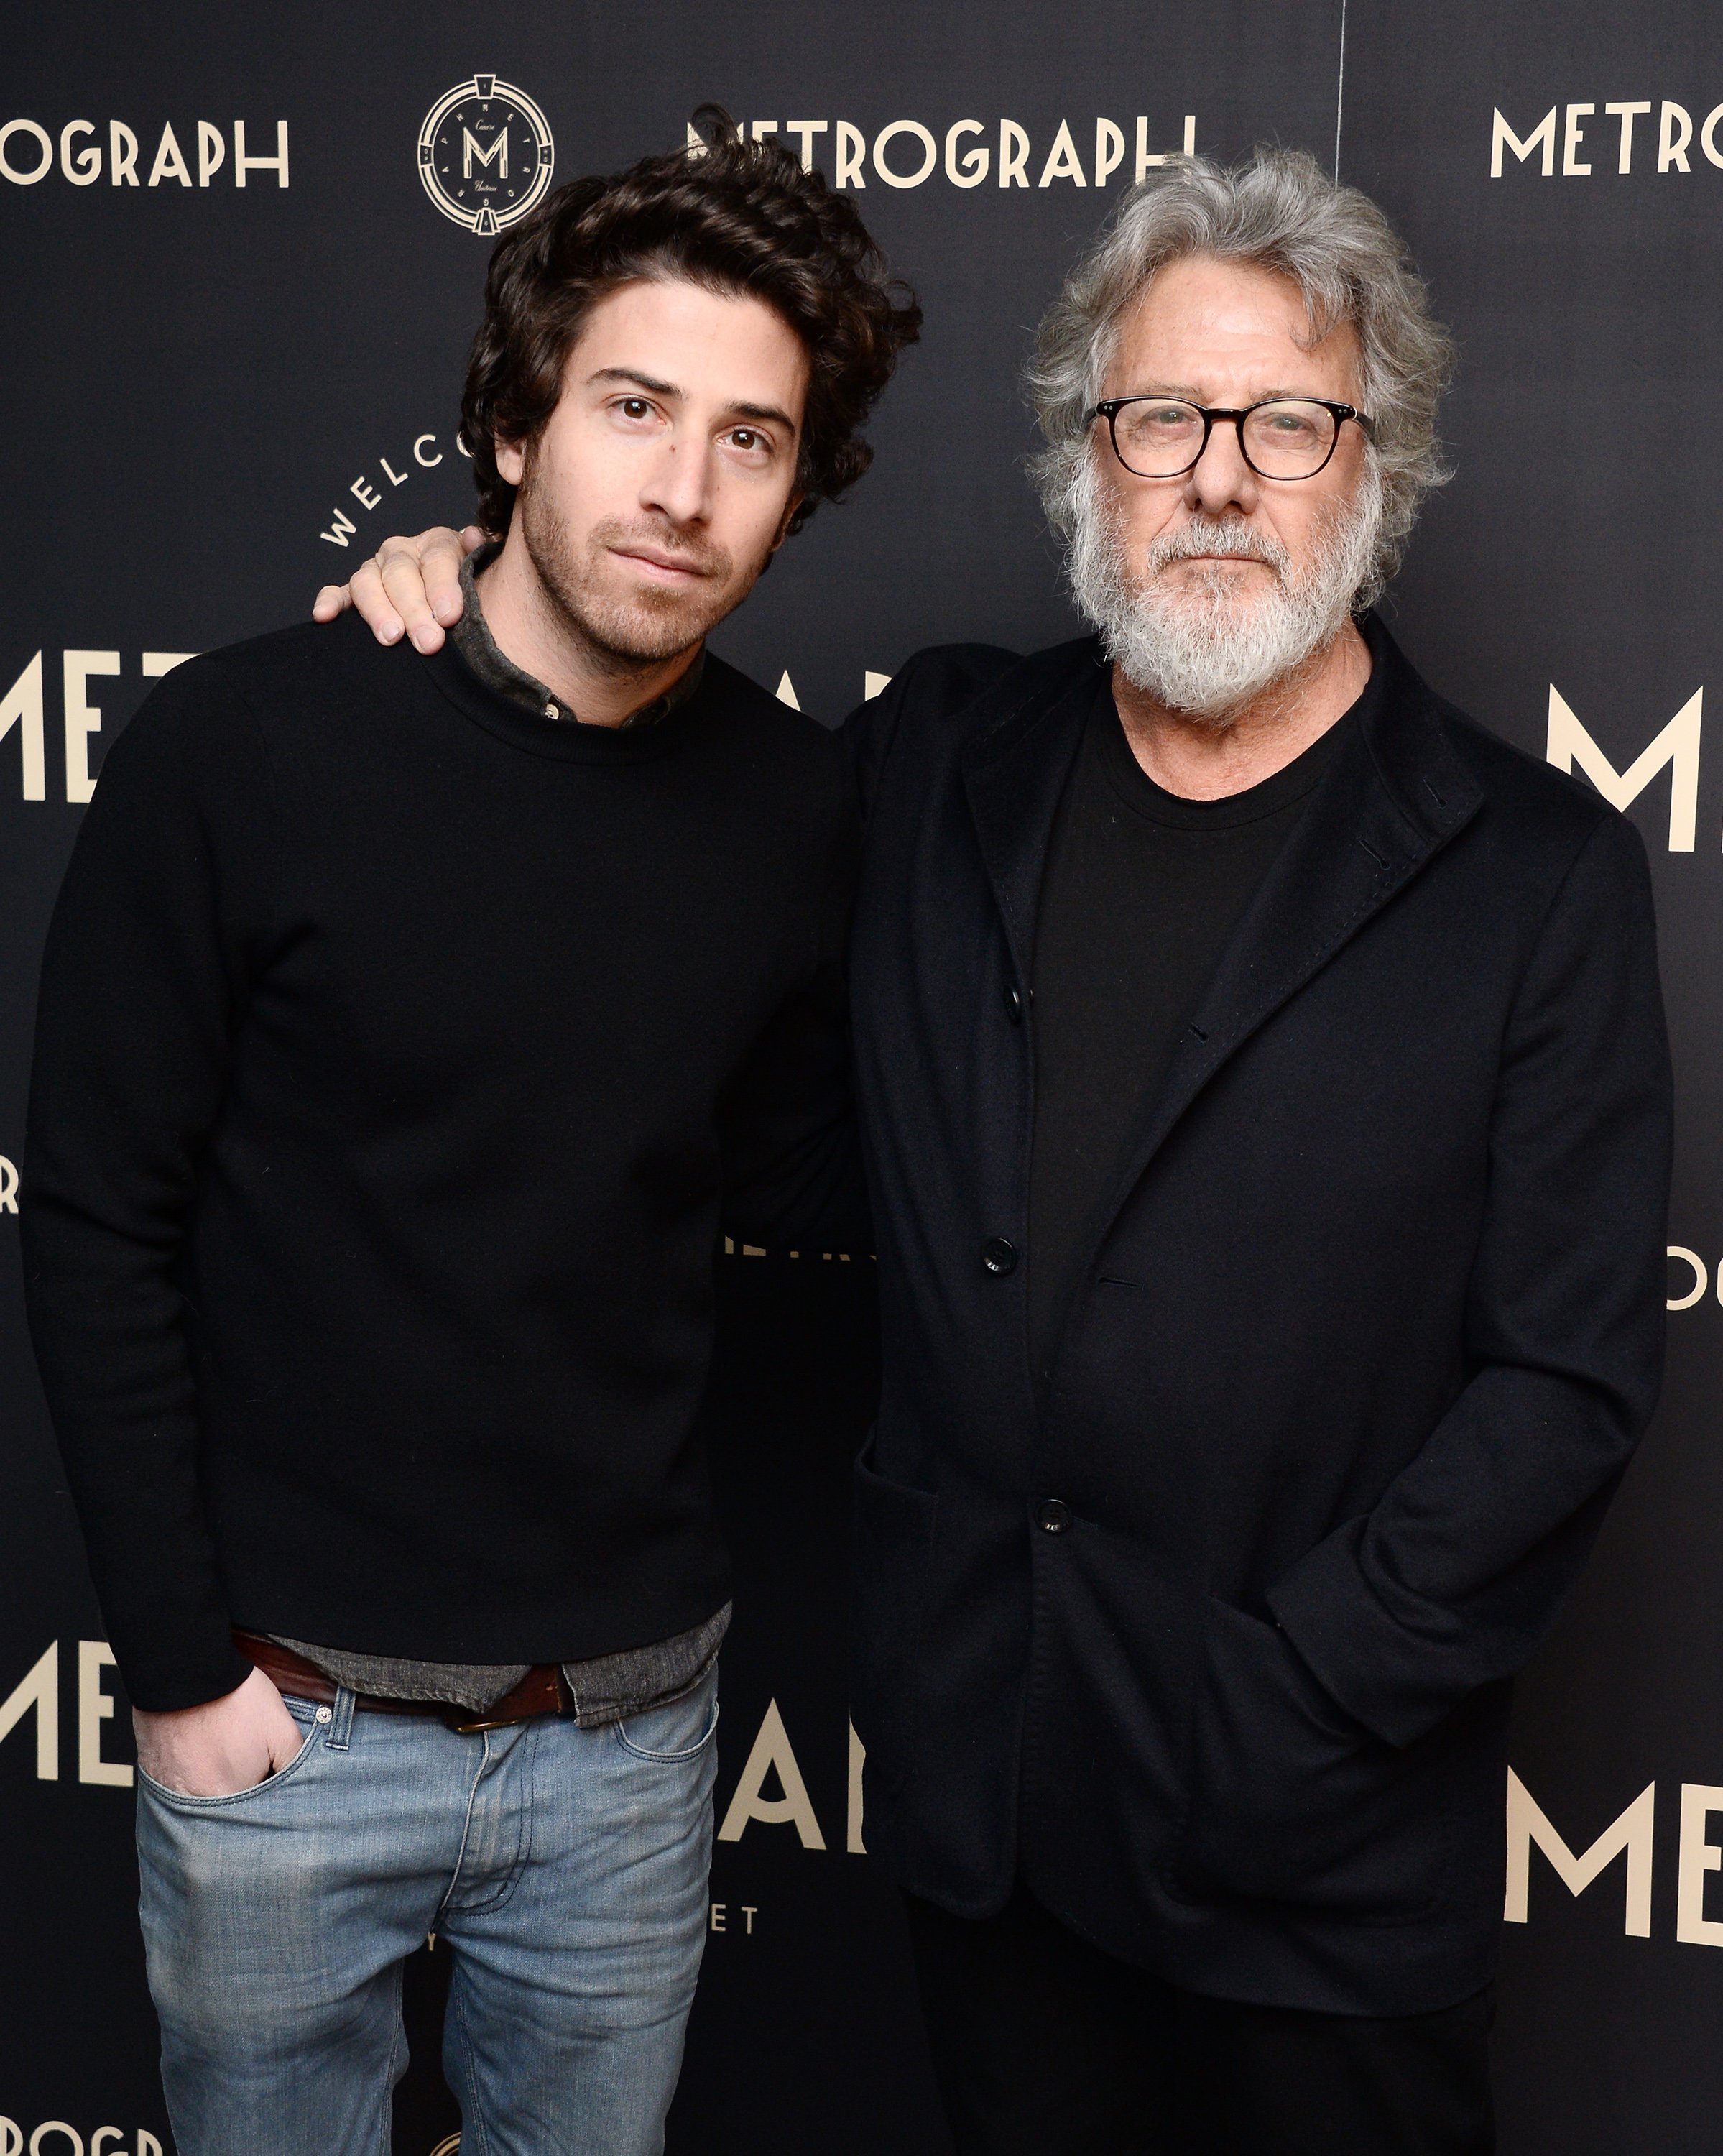 Jake and Dustin Hoffman at the Metrograph opening night on March 2, 2016, in New York City | Source: Getty Images